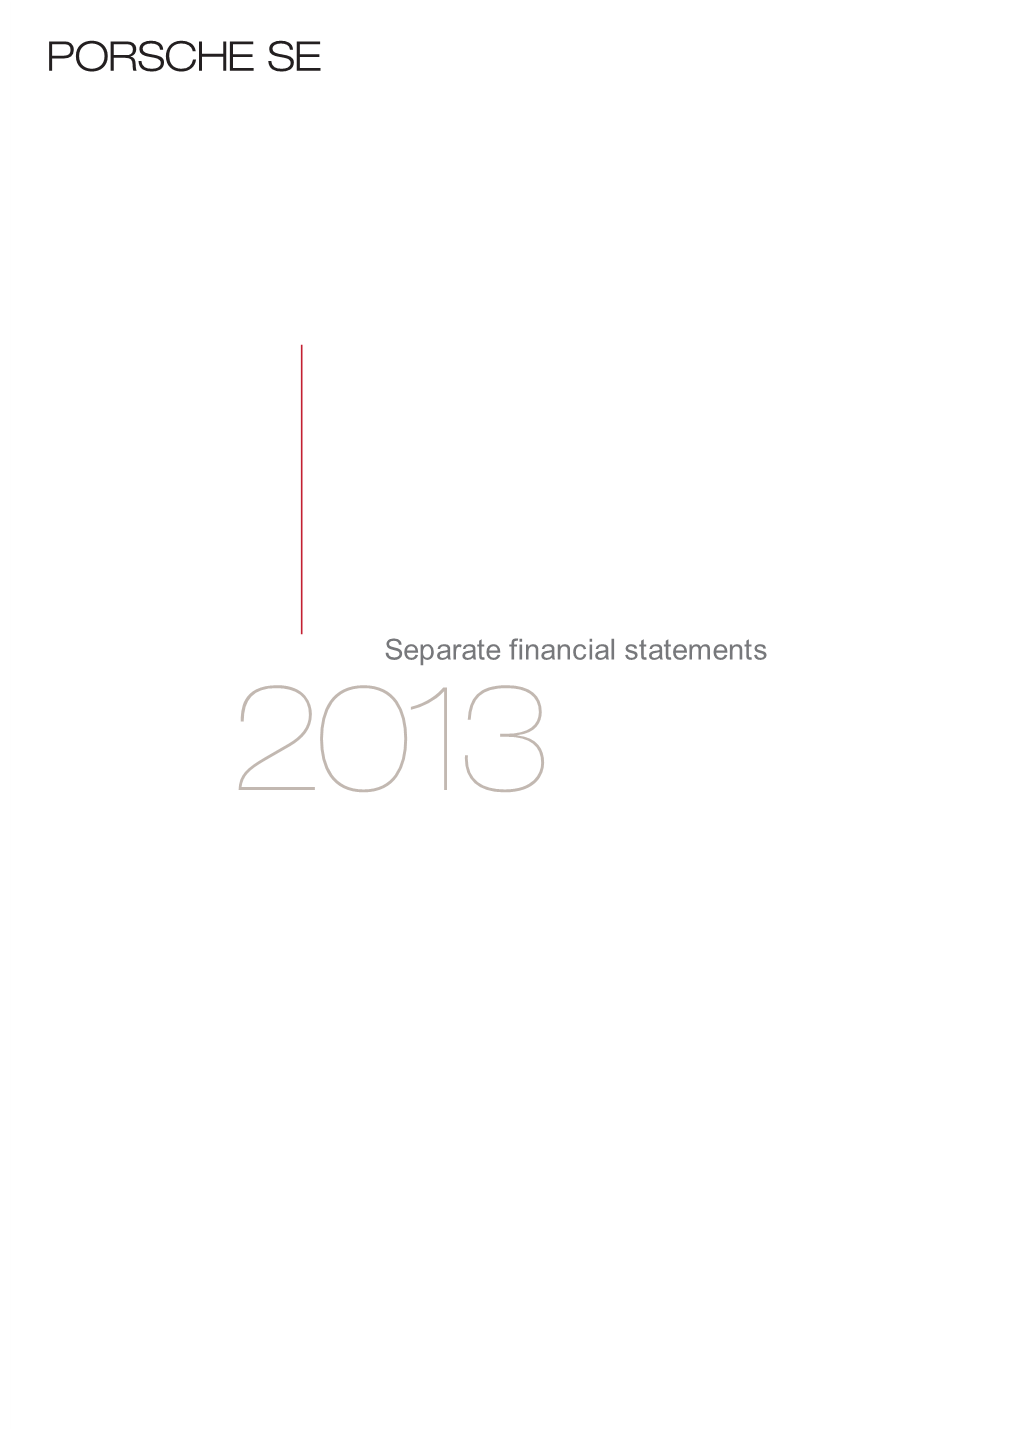 Separate Financial Statements Fiscal Year 2013